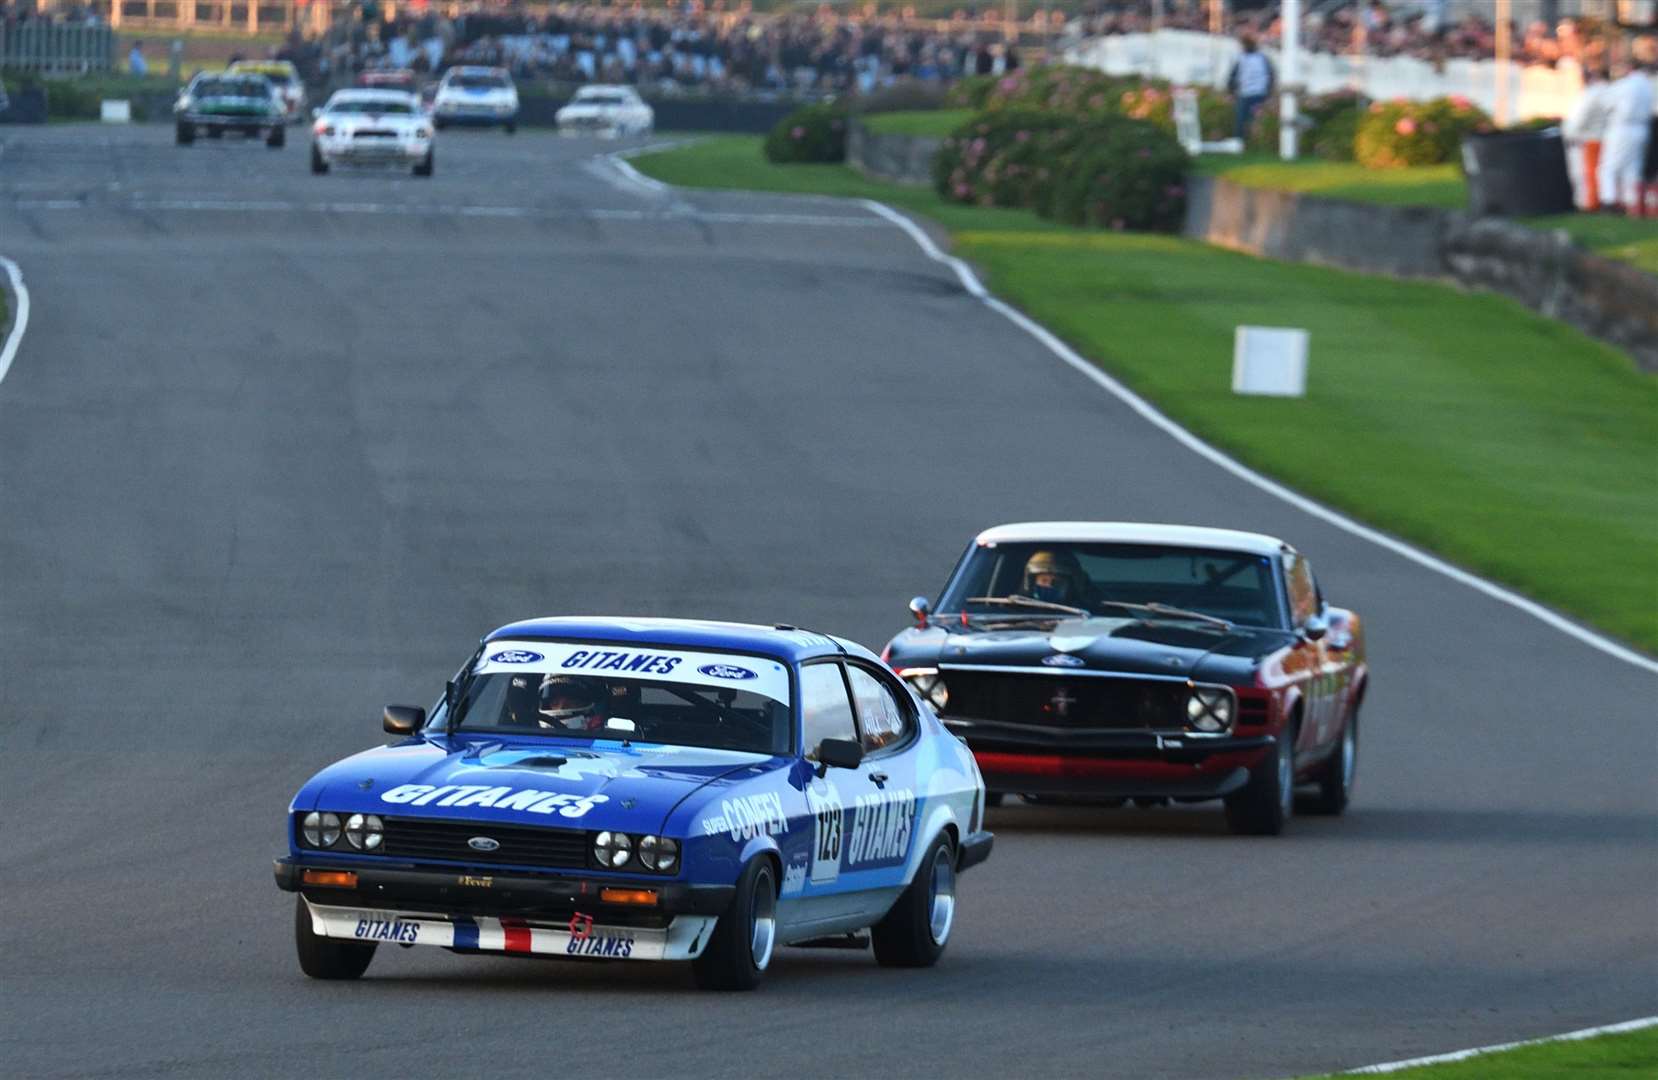 Hill leads Craig Davies, in his Ford Mustang Boss, at the Goodwood Members' Meeting